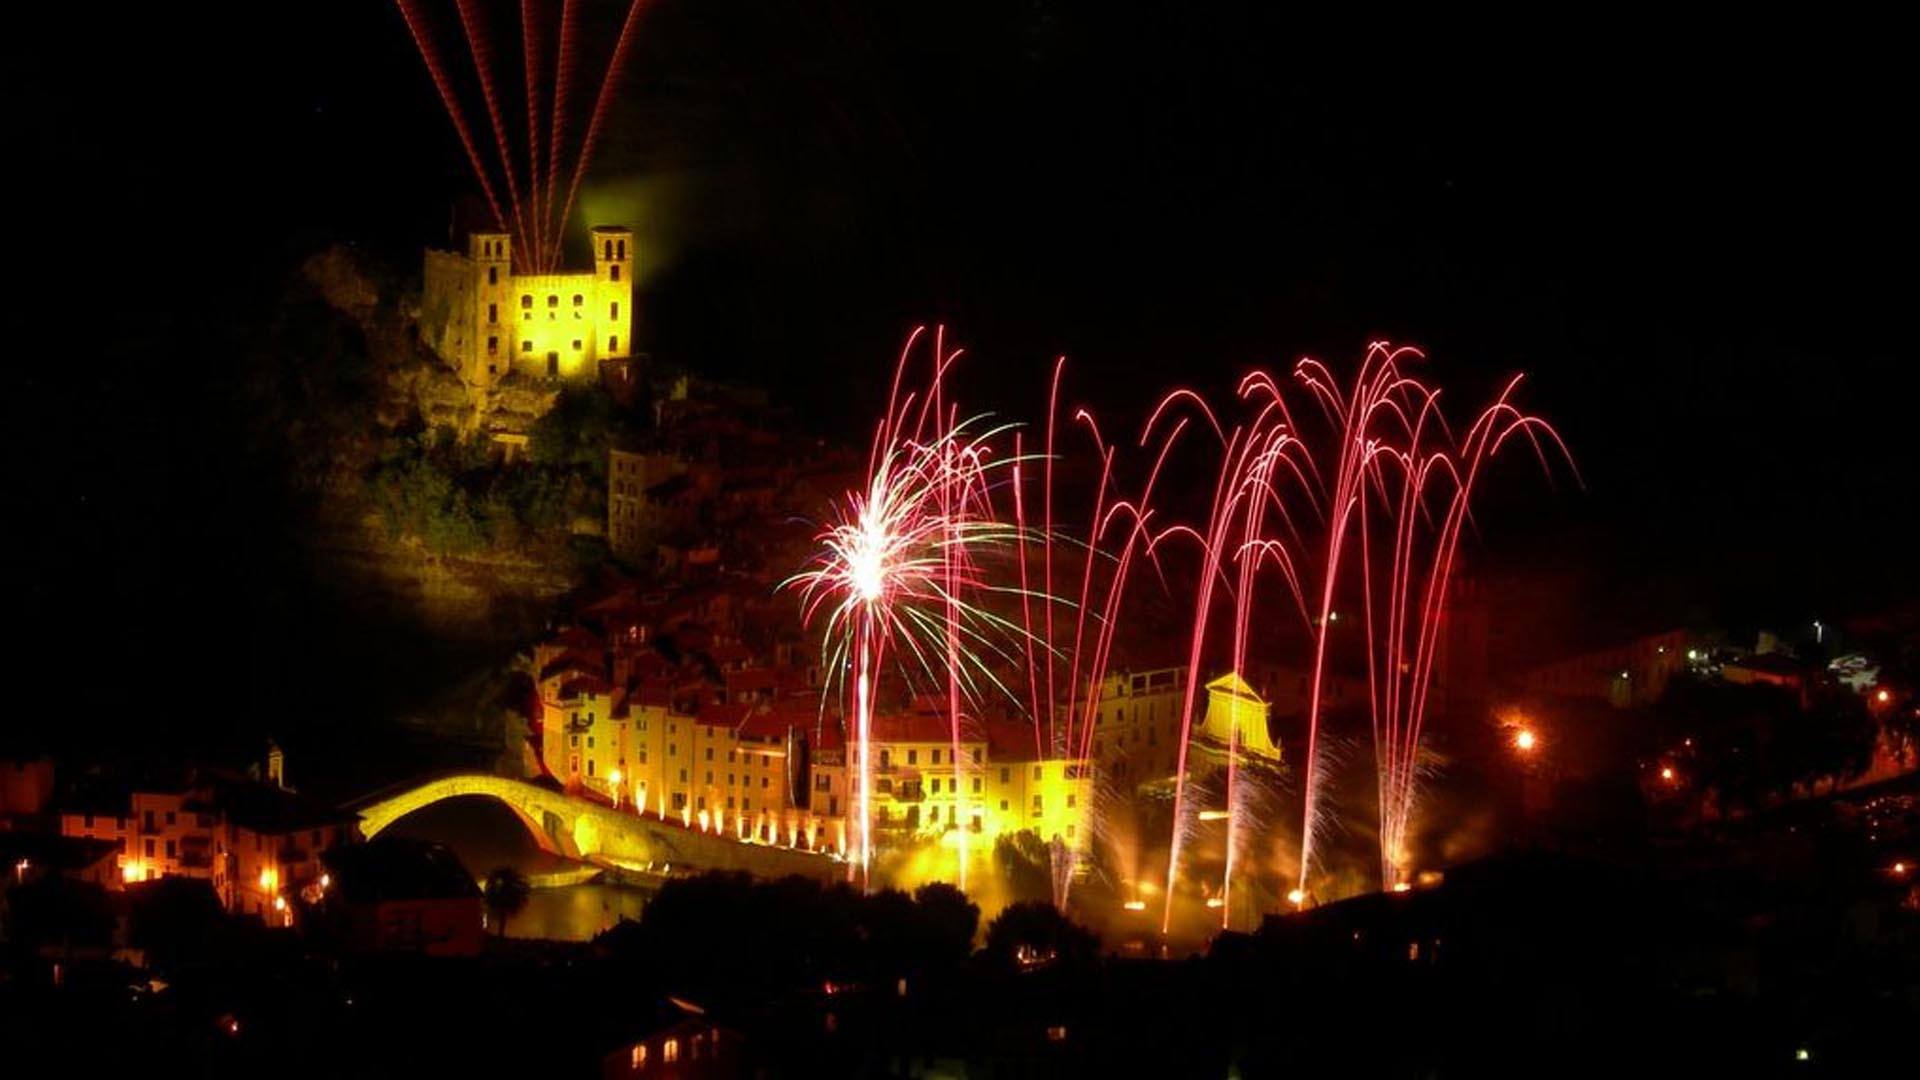 The traditional fireworks in Dolceacqua in August